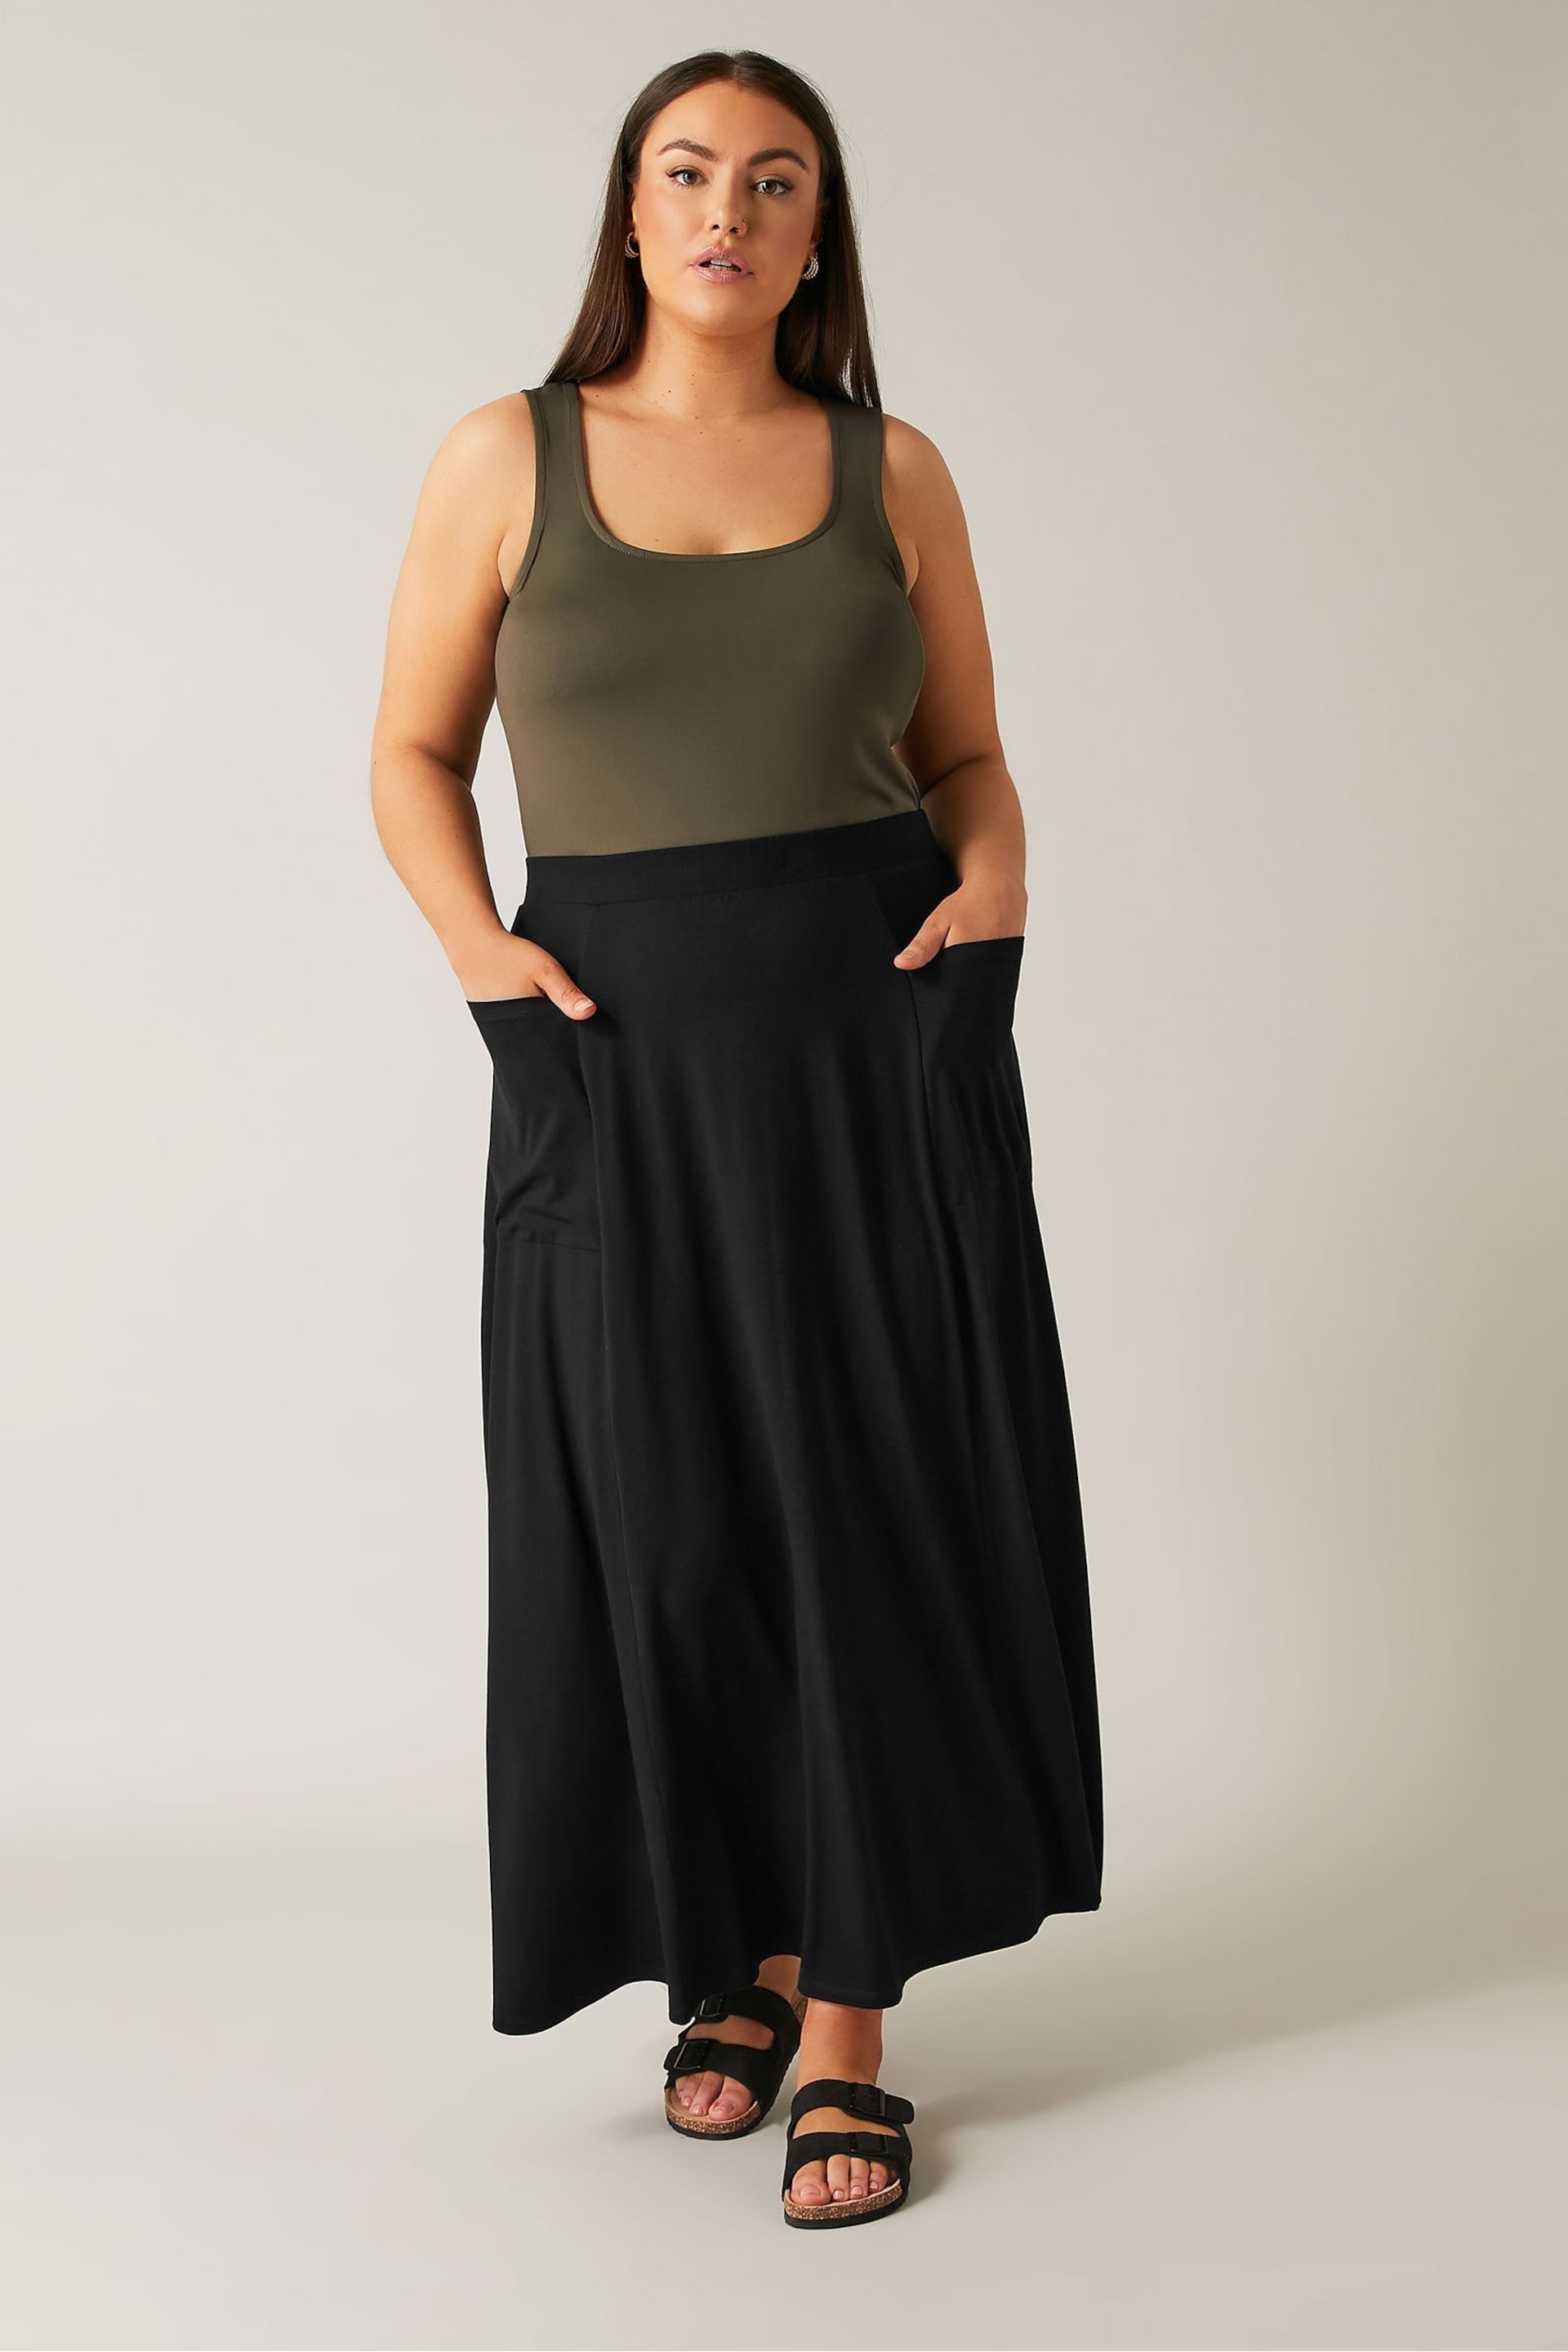 Evans Curve Maxi Skirt - Image 2 of 4